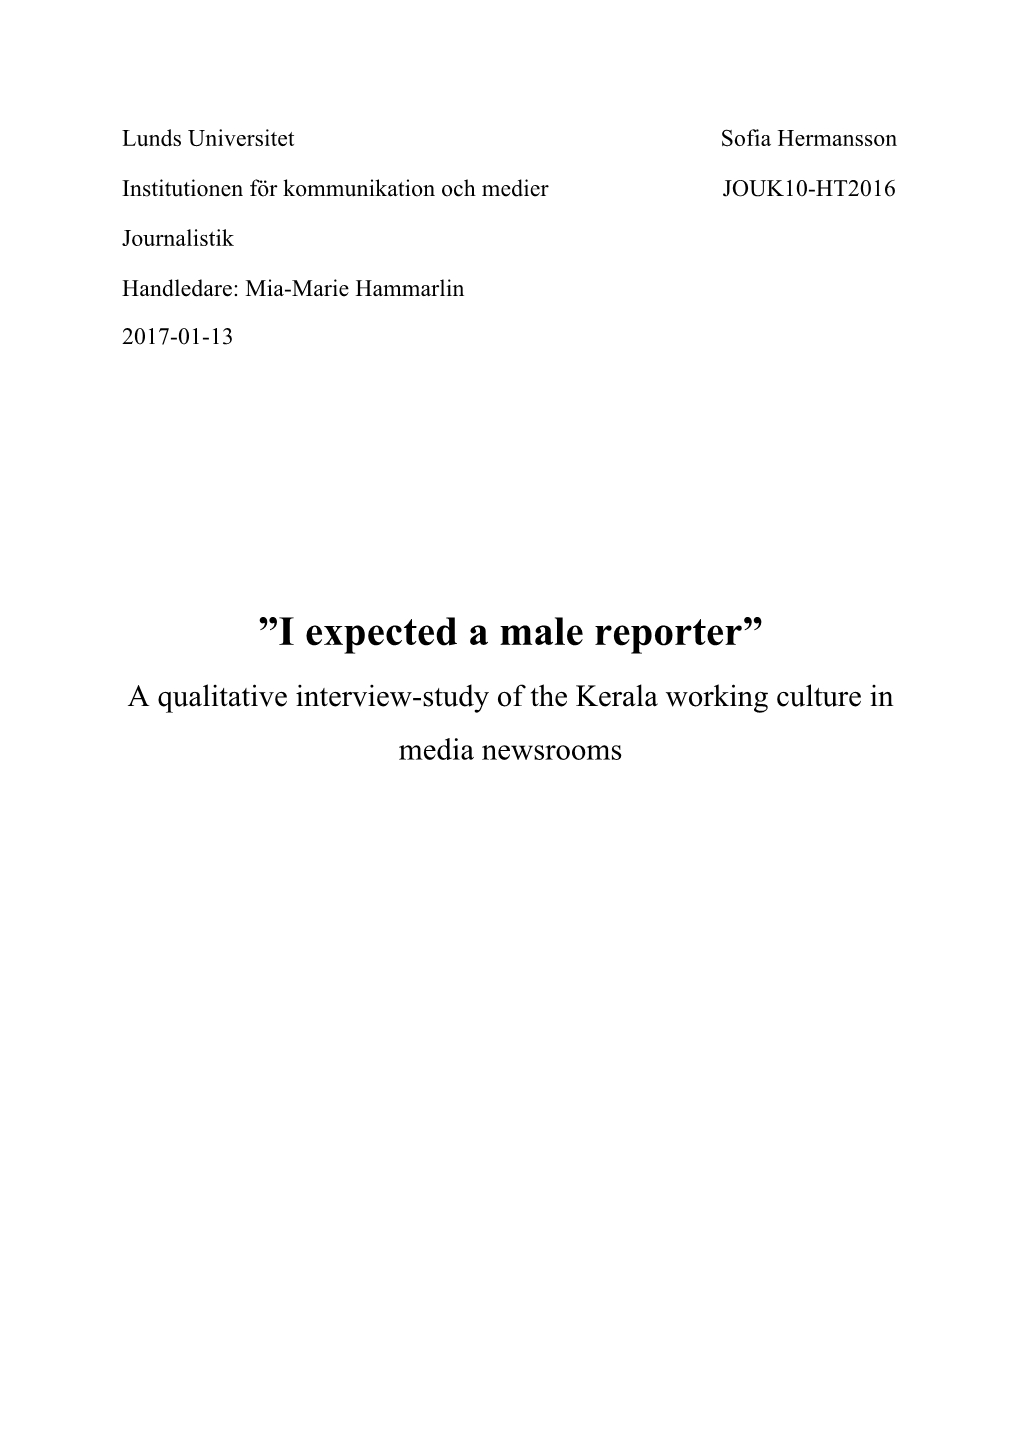 I Expected a Male Reporter” a Qualitative Interview-Study of the Kerala Working Culture in Media Newsrooms